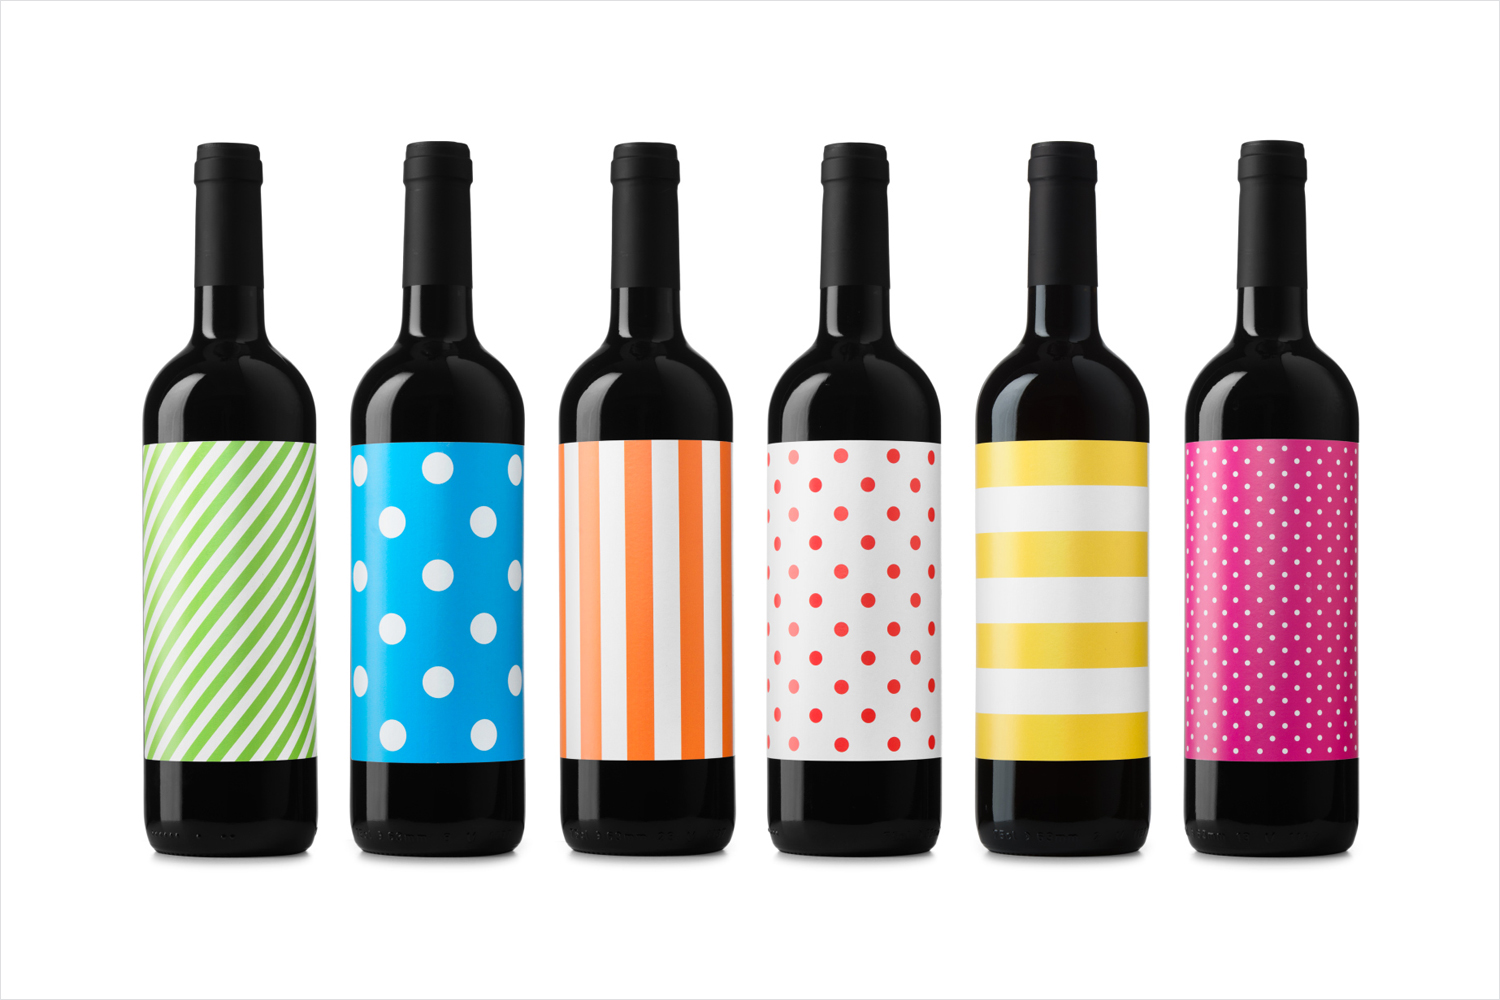 Packaging design by Barcelona-based studio Atipus for Vi Novell 2016, a young wine from producer Celler Masroig